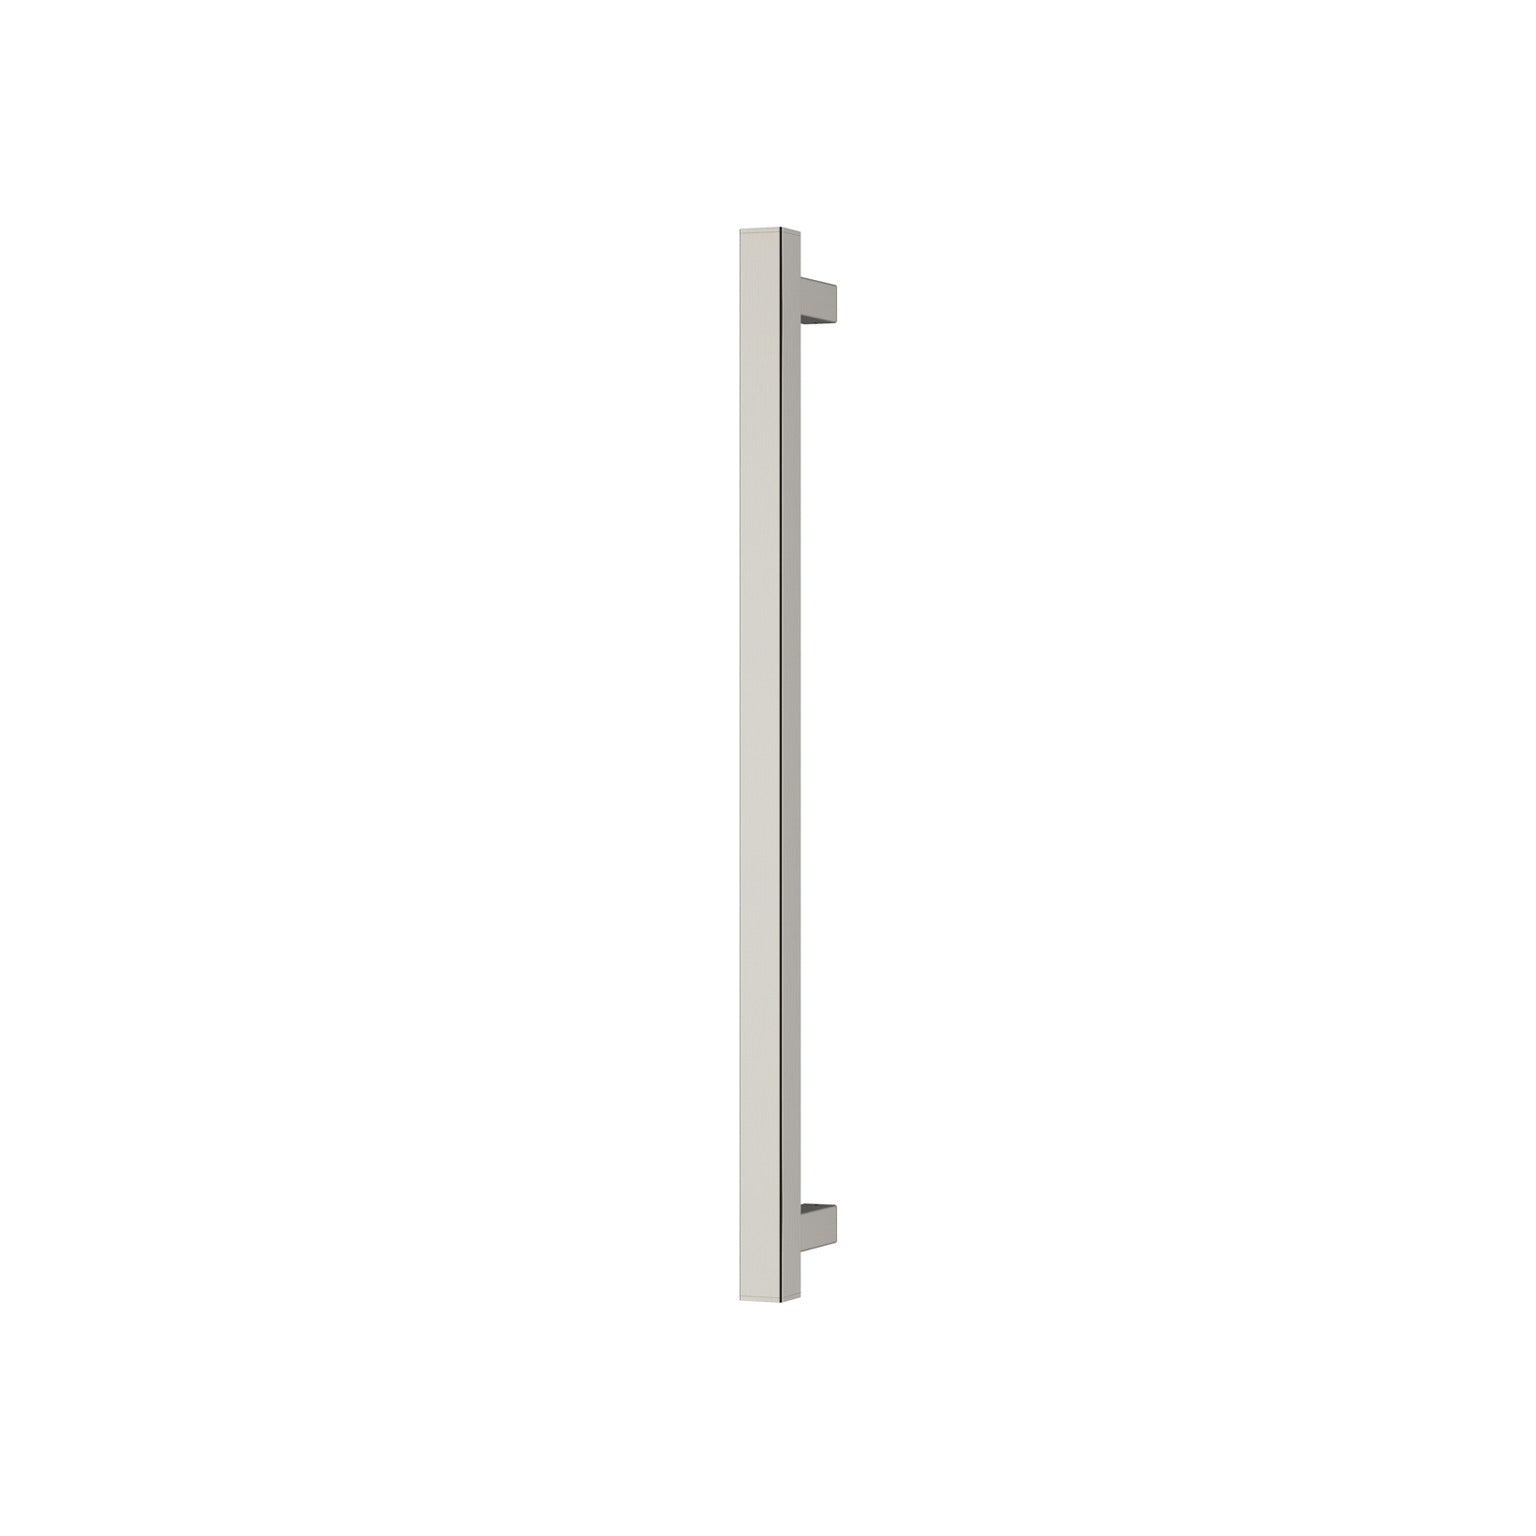 PHOENIX SQUARE SINGLE HEATED TOWEL RAIL BRUSHED NICKEL (AVAILABLE IN 600MM AND 800MM)